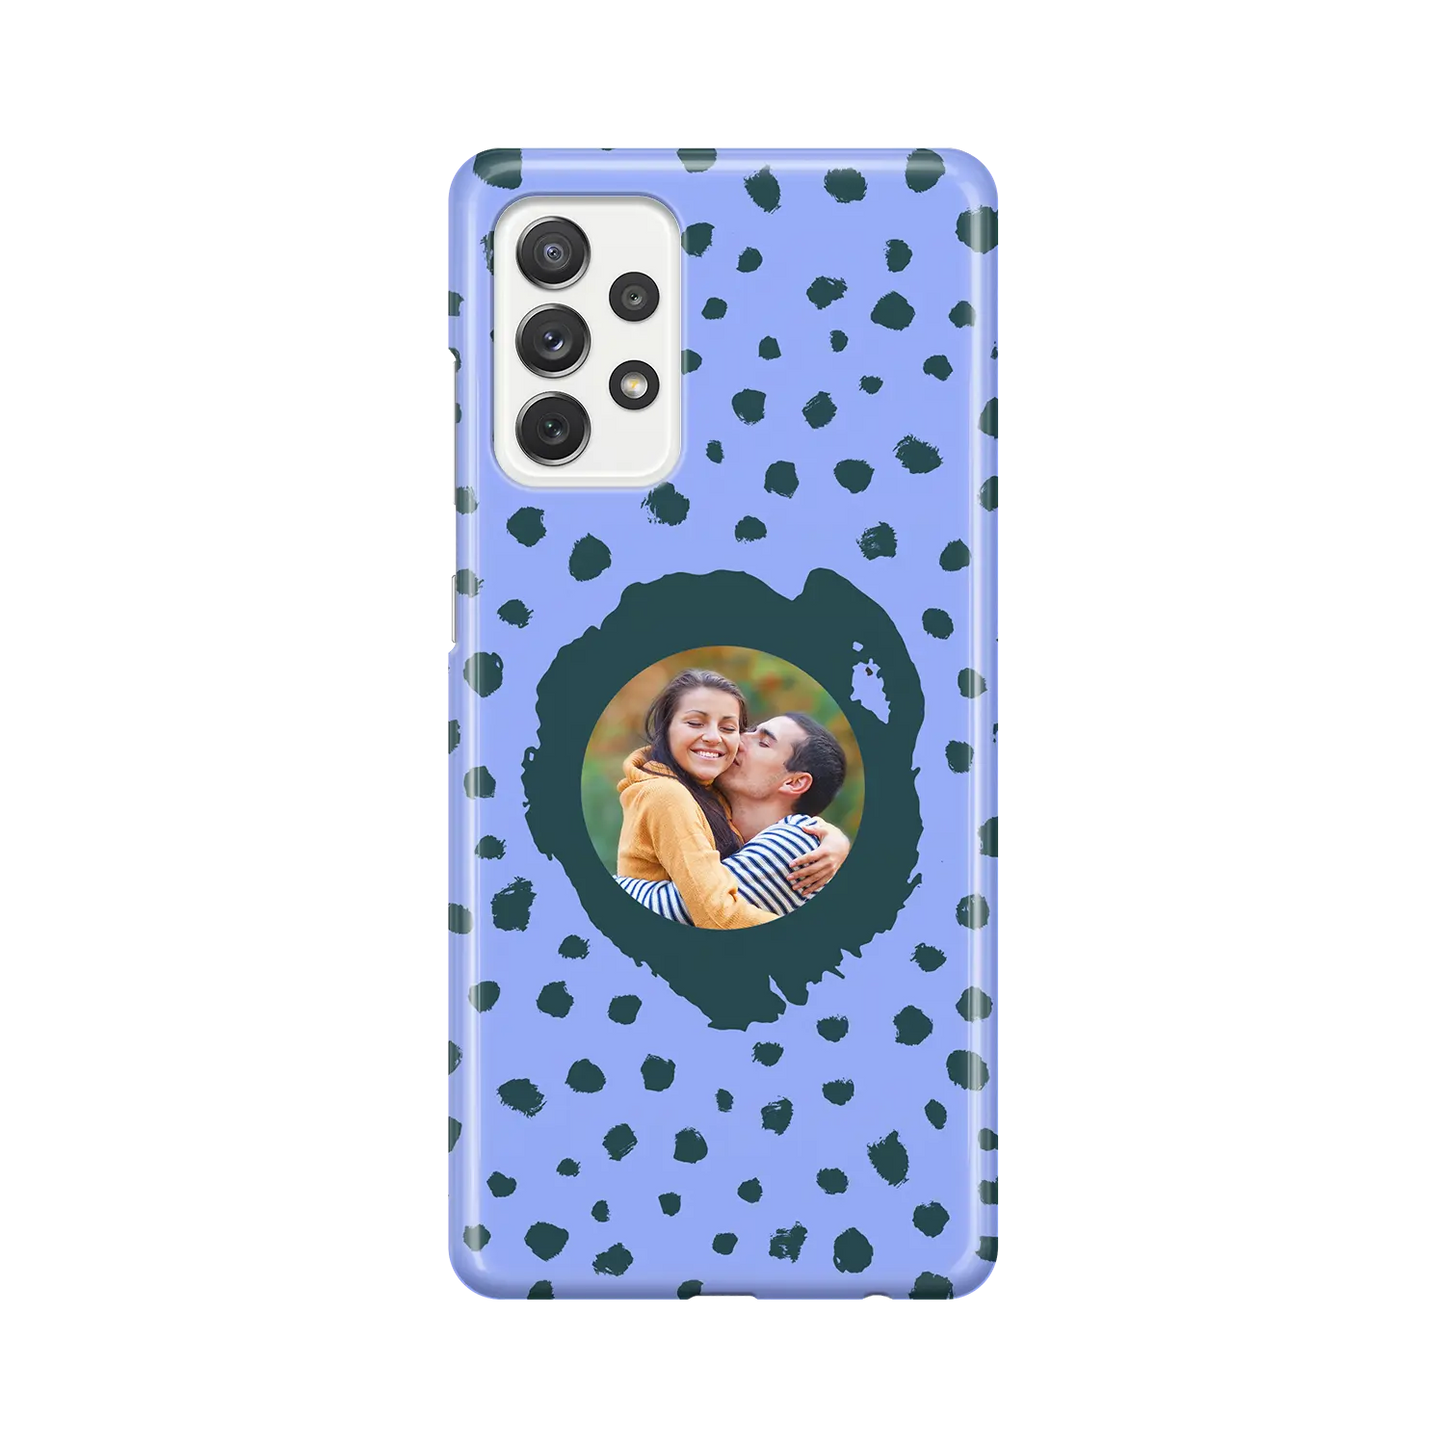 Grunge Dots Photo Style - Coque Galaxy A personnalisée Case